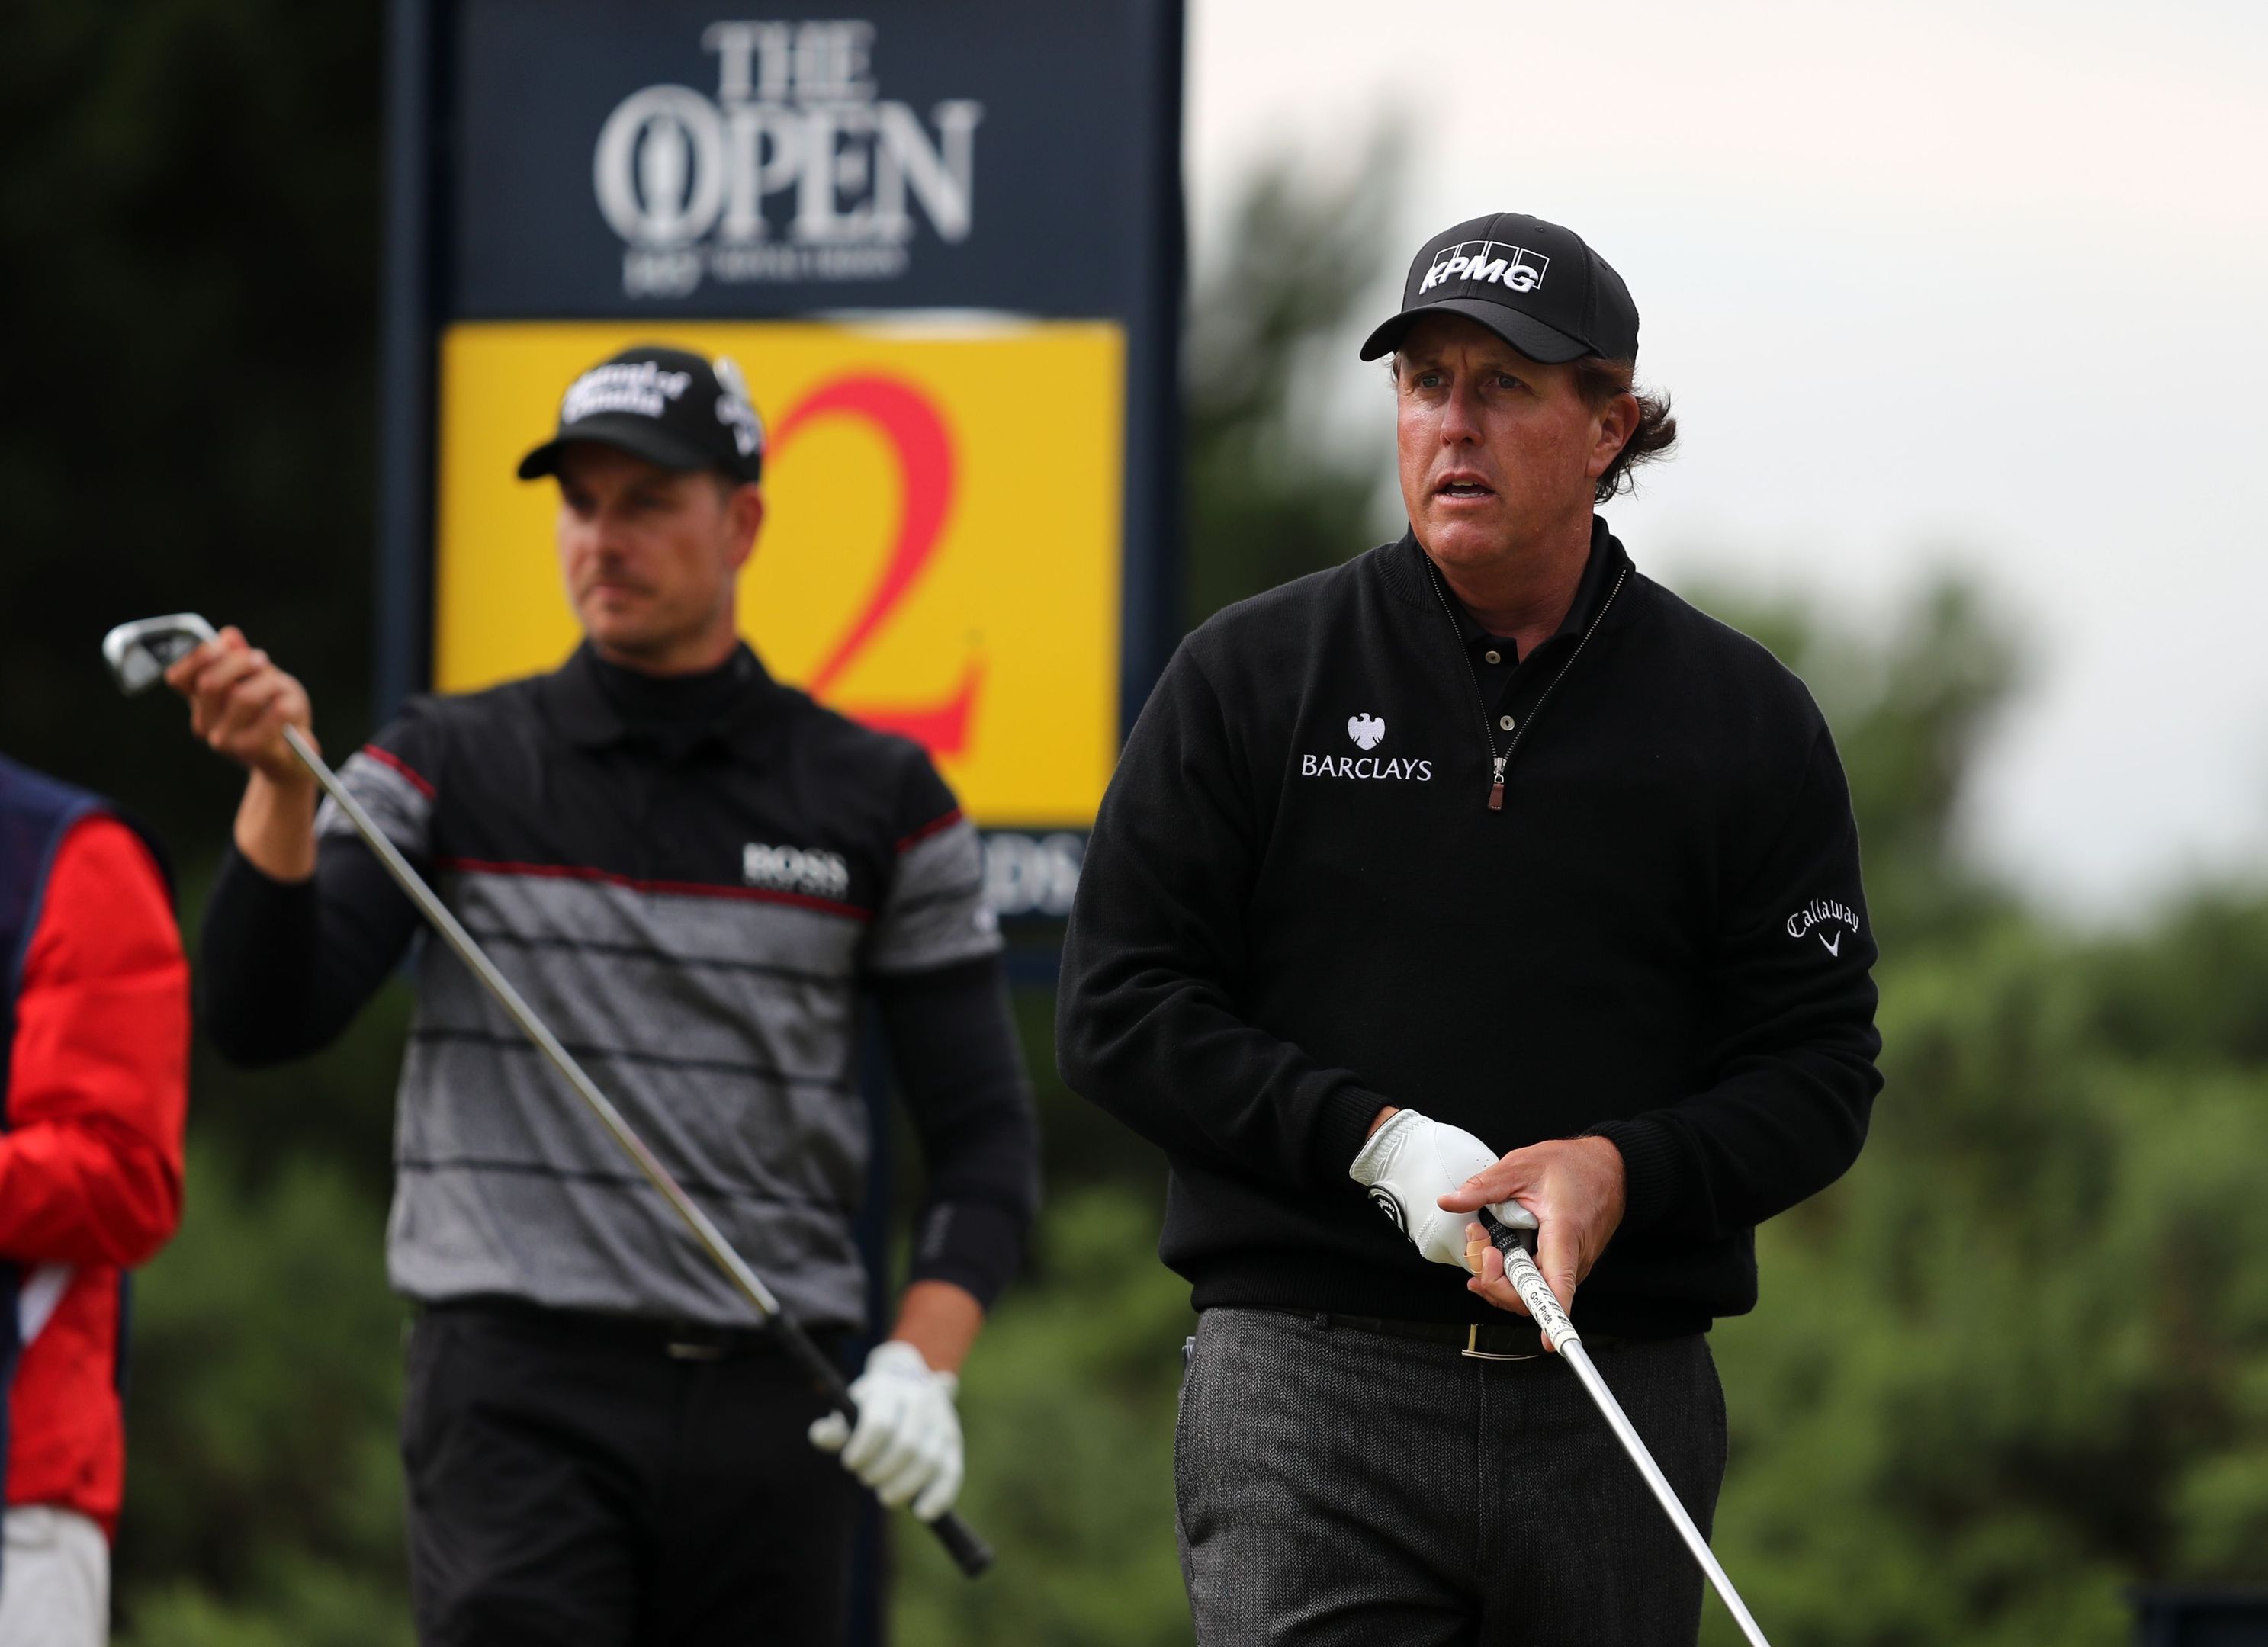 Henrik Stenson and Phil Mickelson during their epic final round duel at Royal Troon.